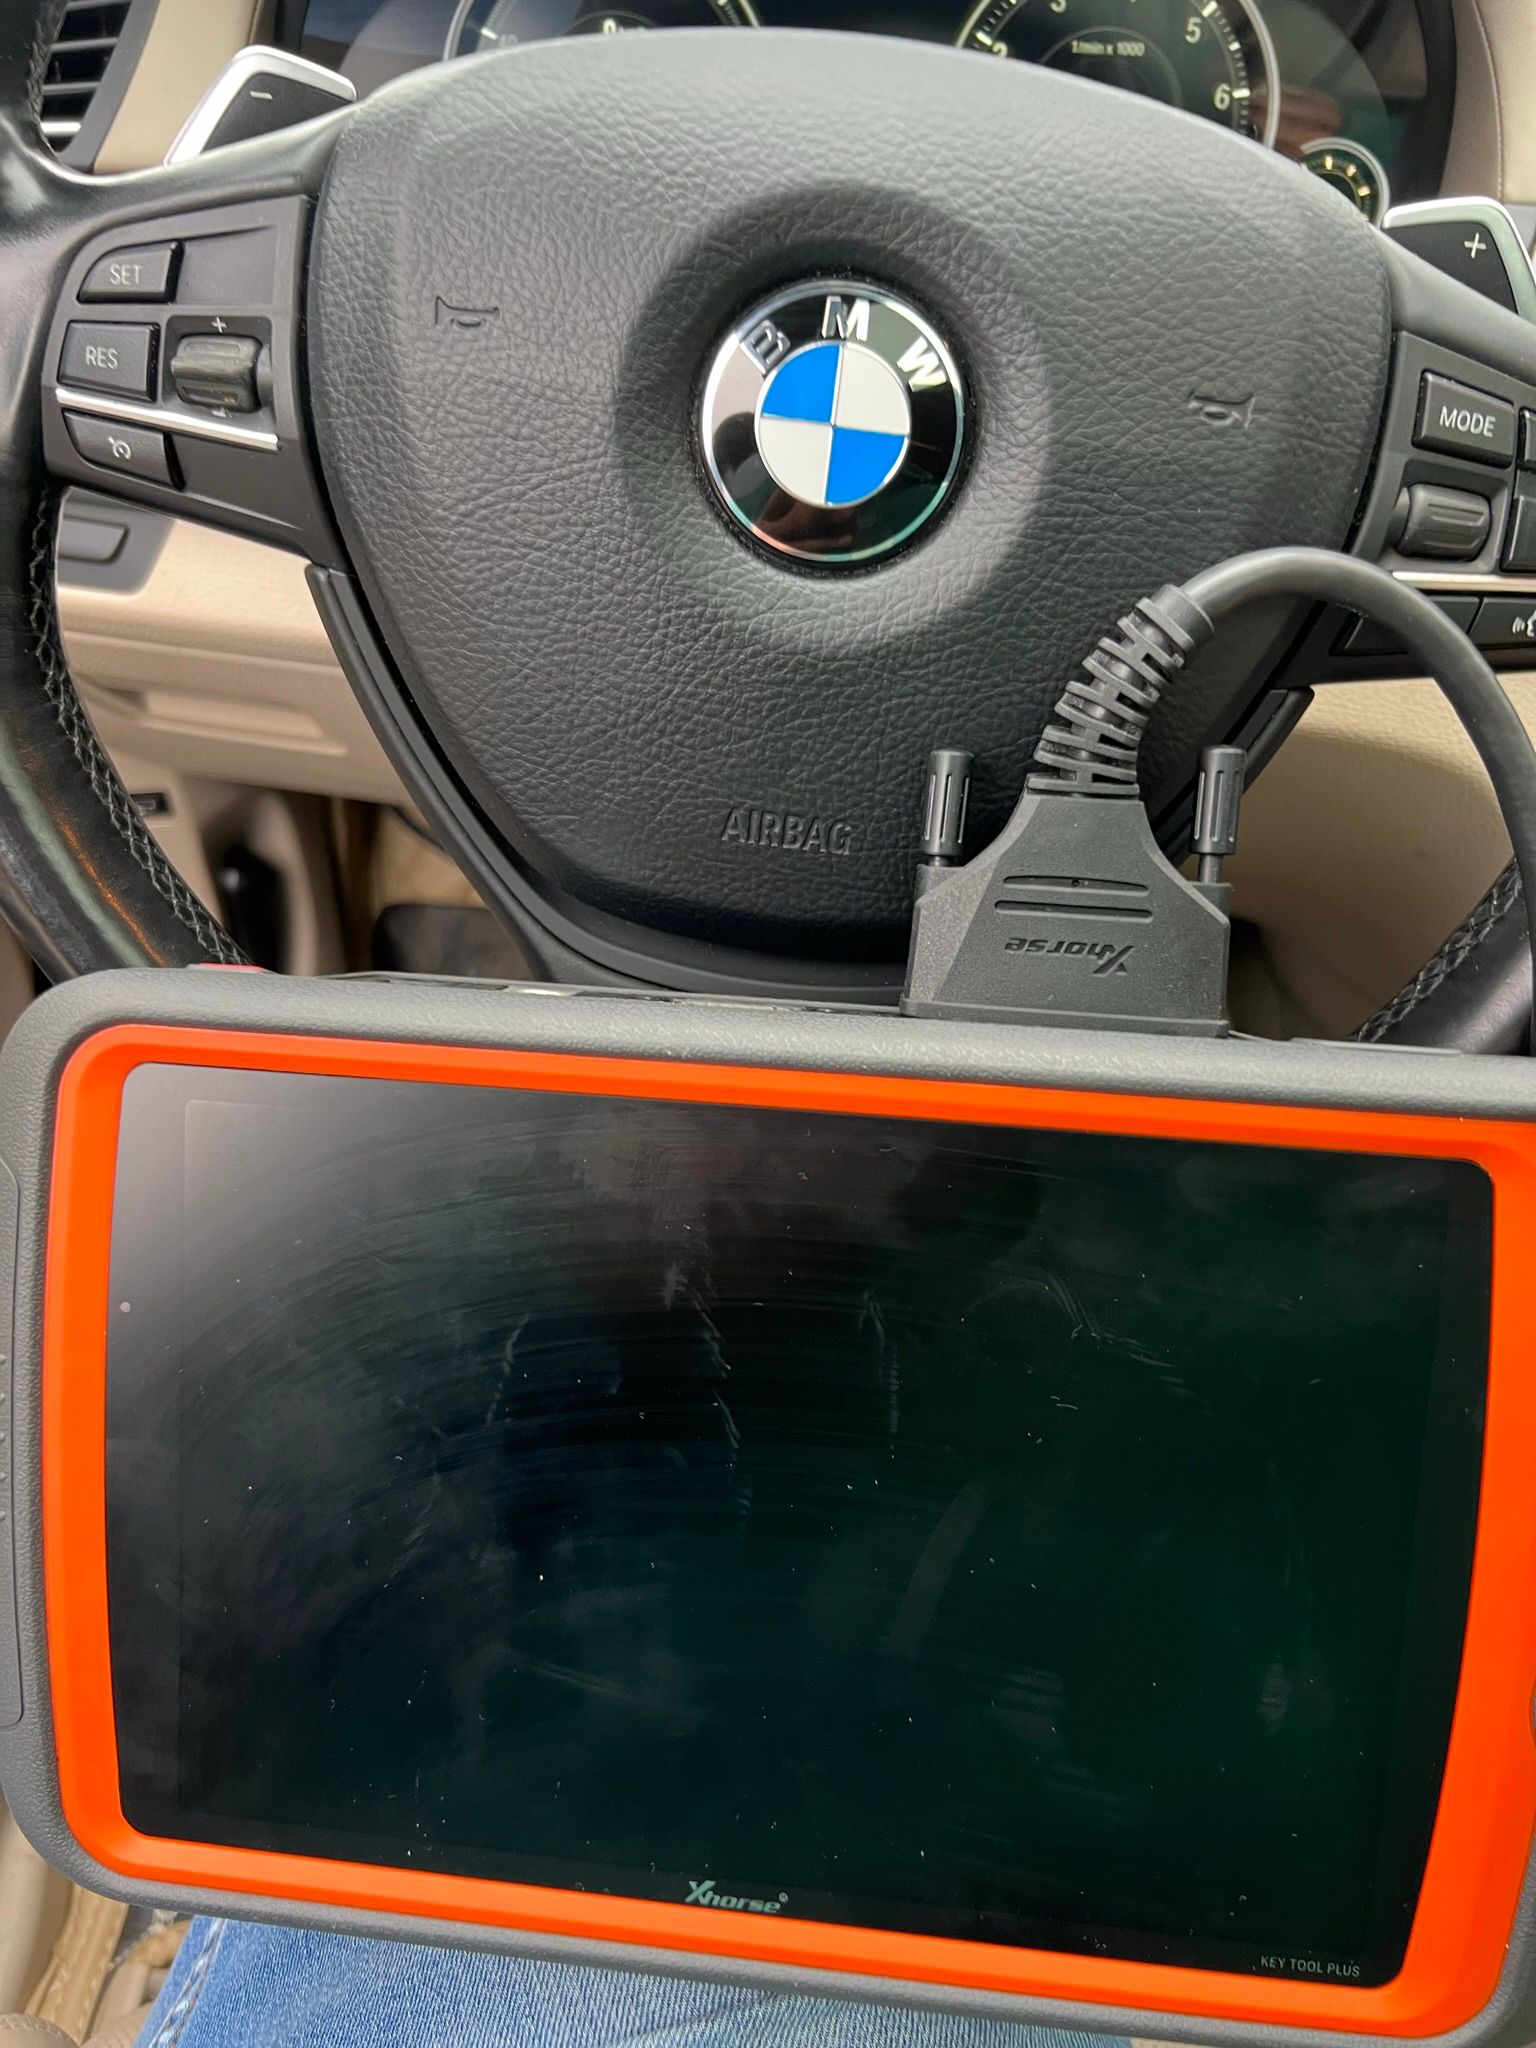 BMW keys replacement Louisville KY (16)